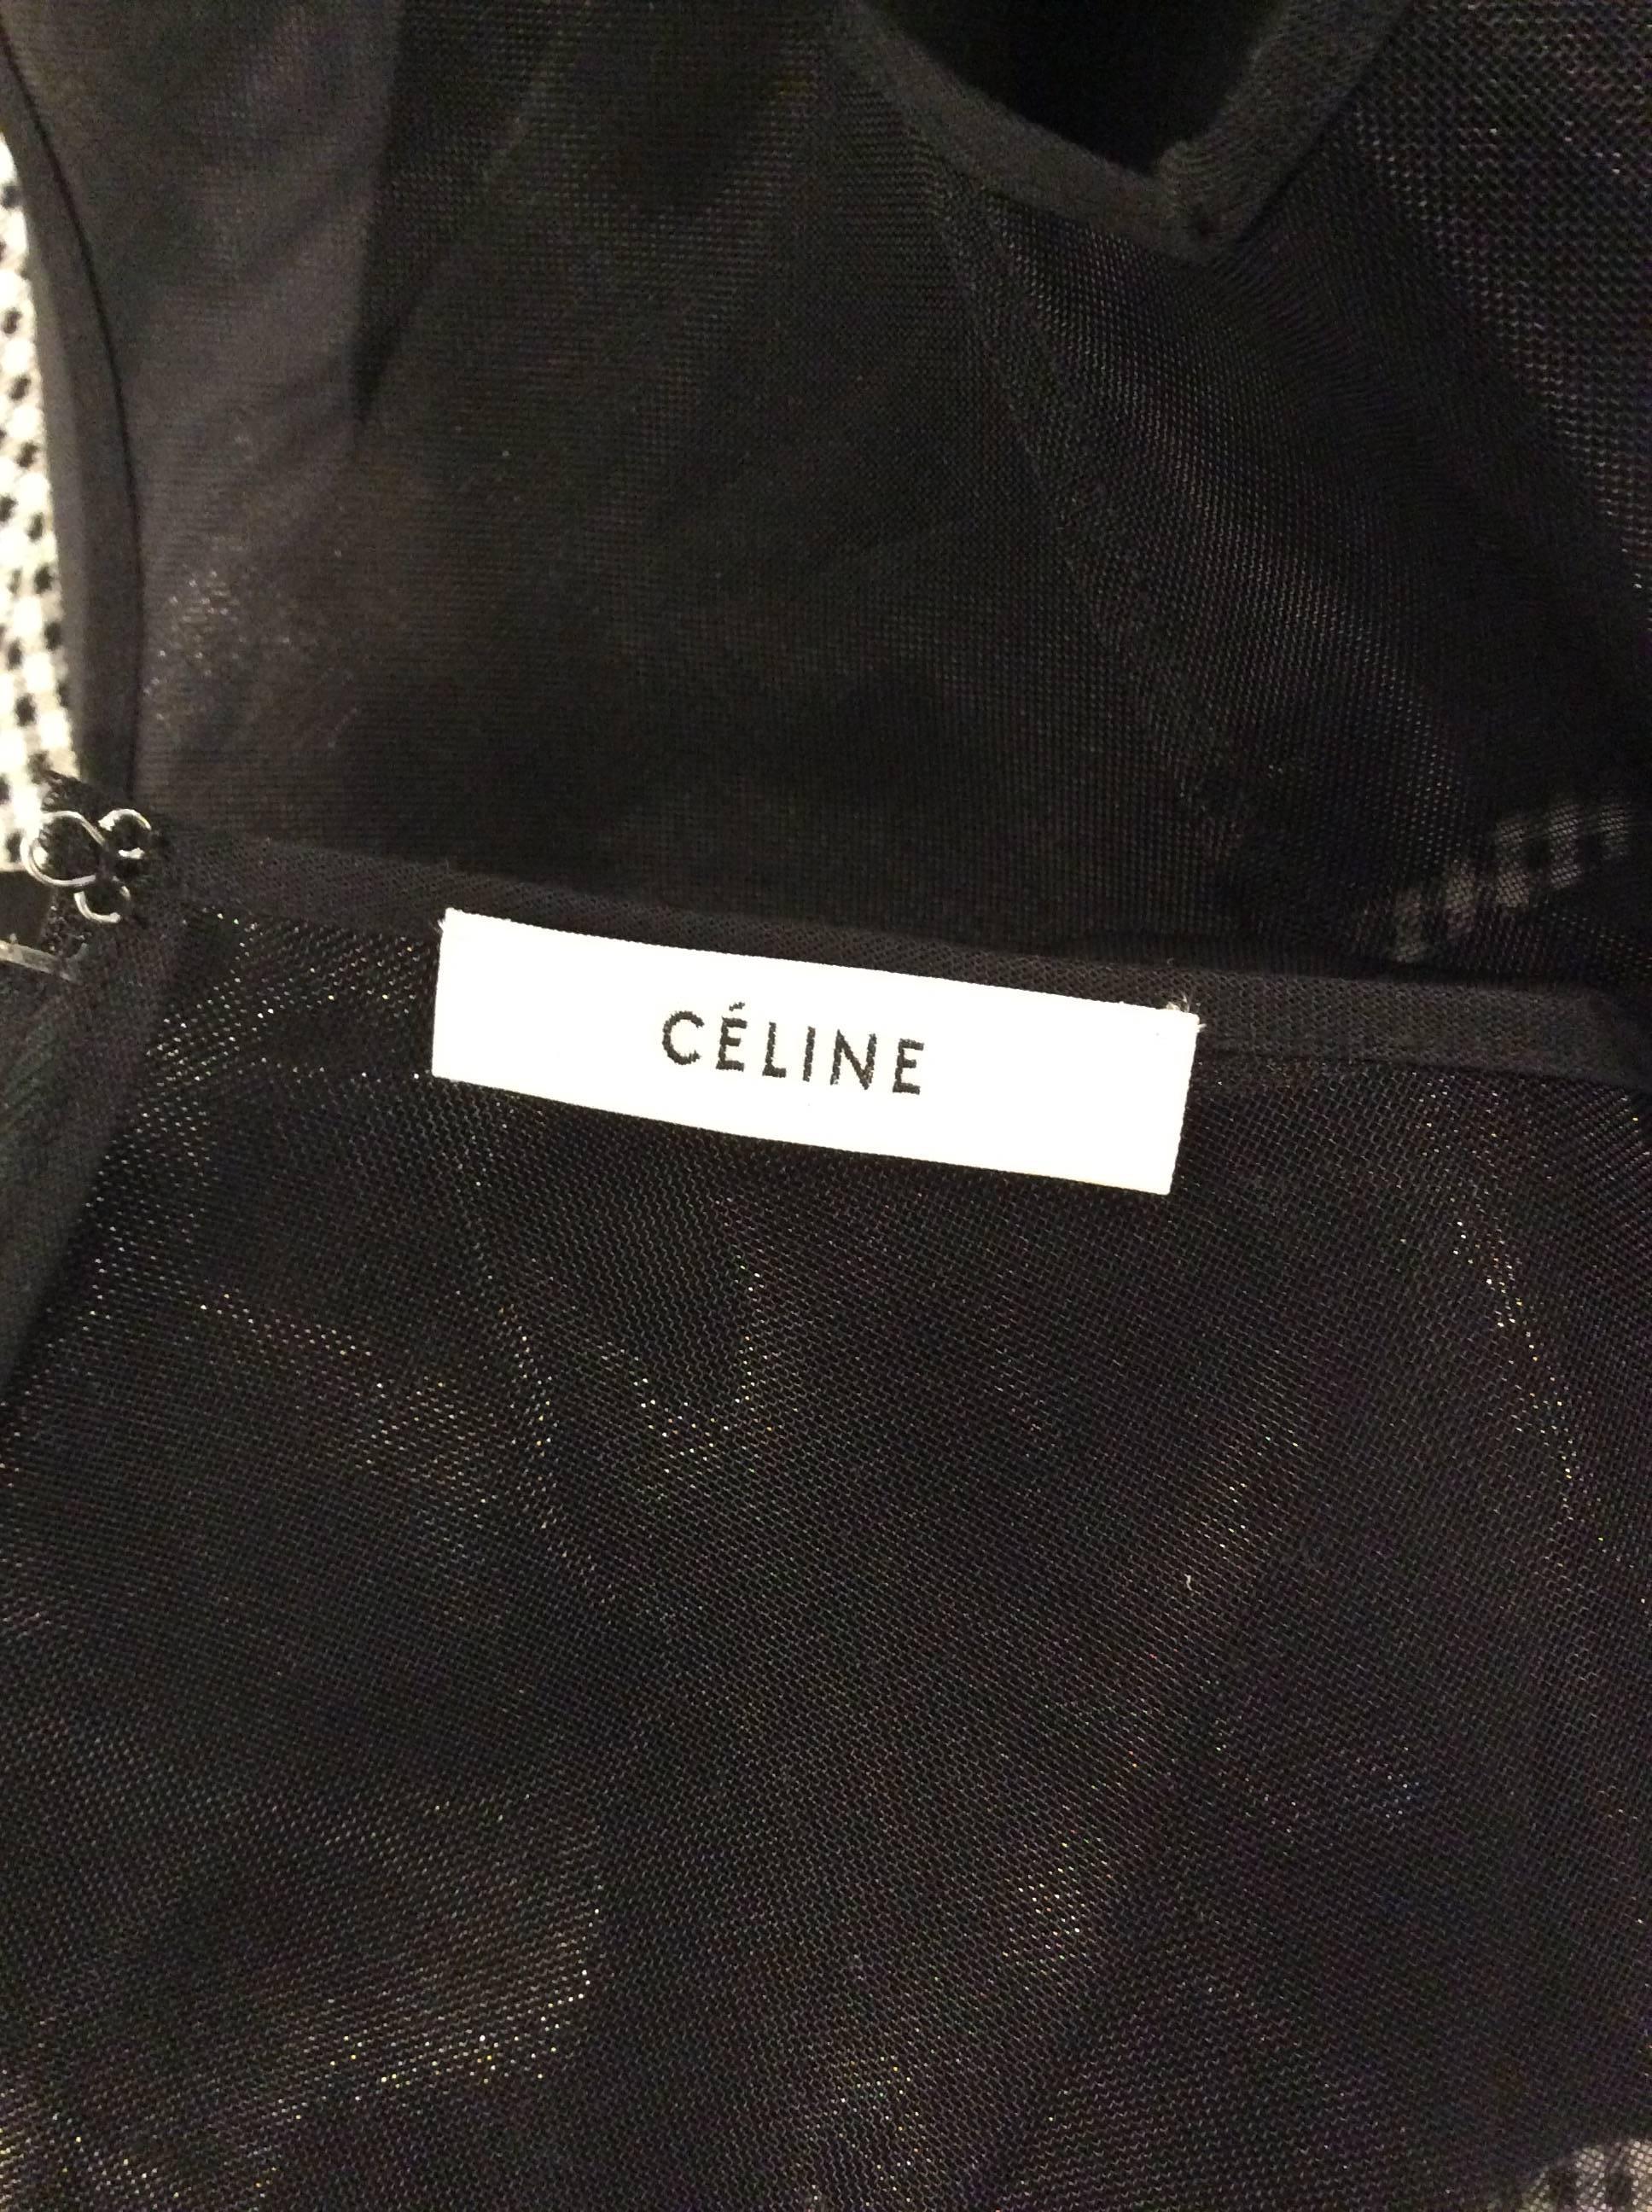 Celine Black and Navy Blue Draped Off the Shoulder Cropped Shirt  Sz Small 3